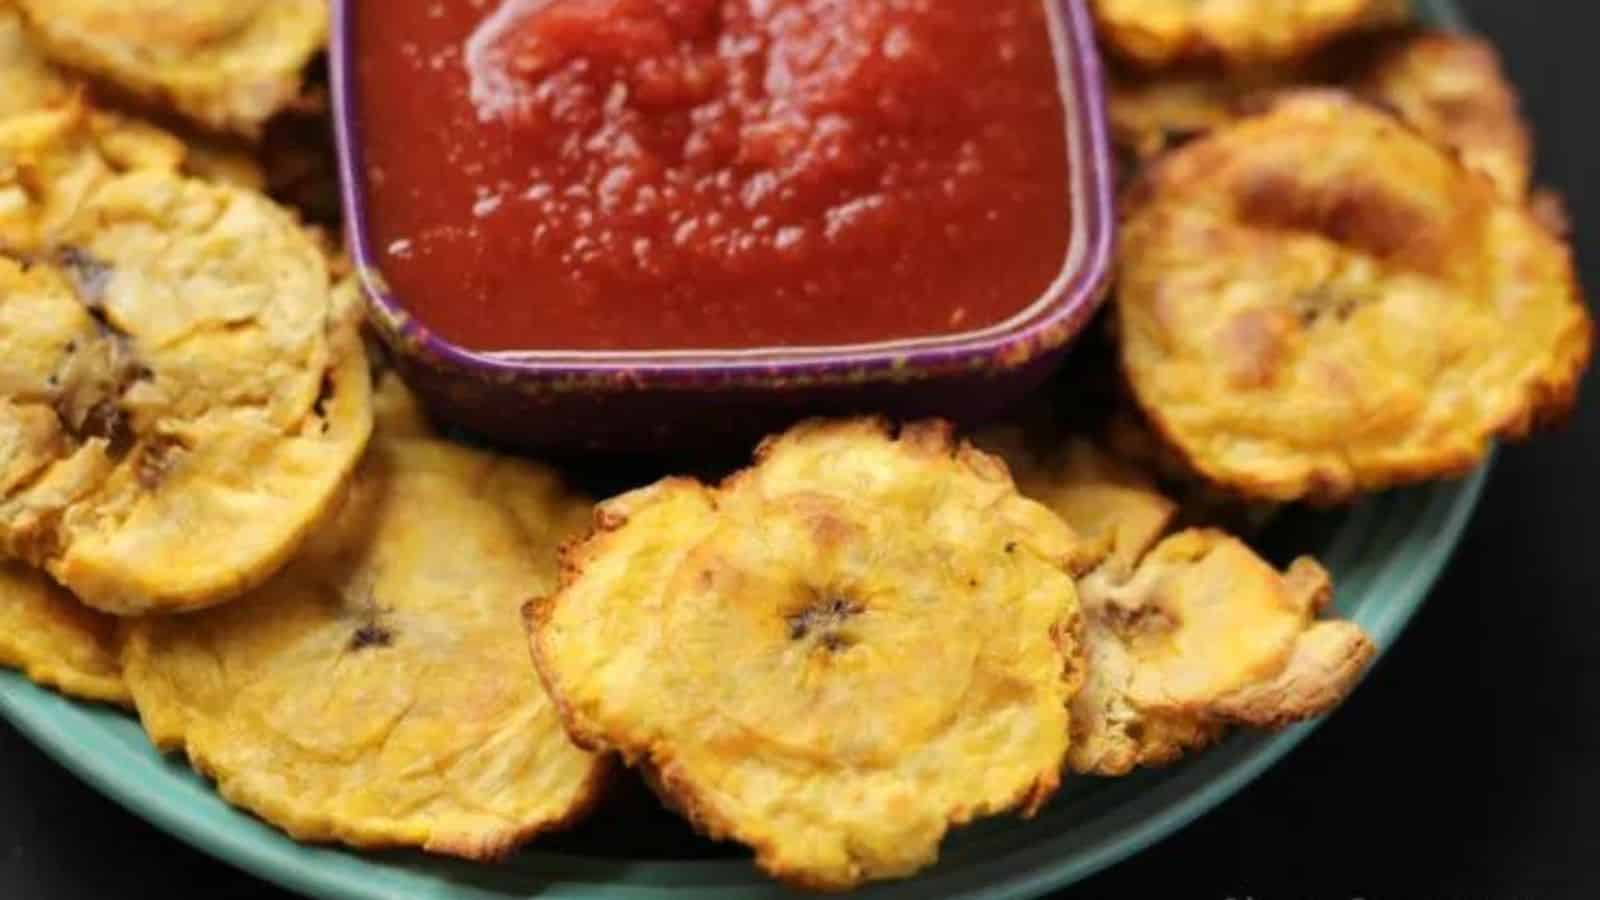 Plate of tostones and salsa.